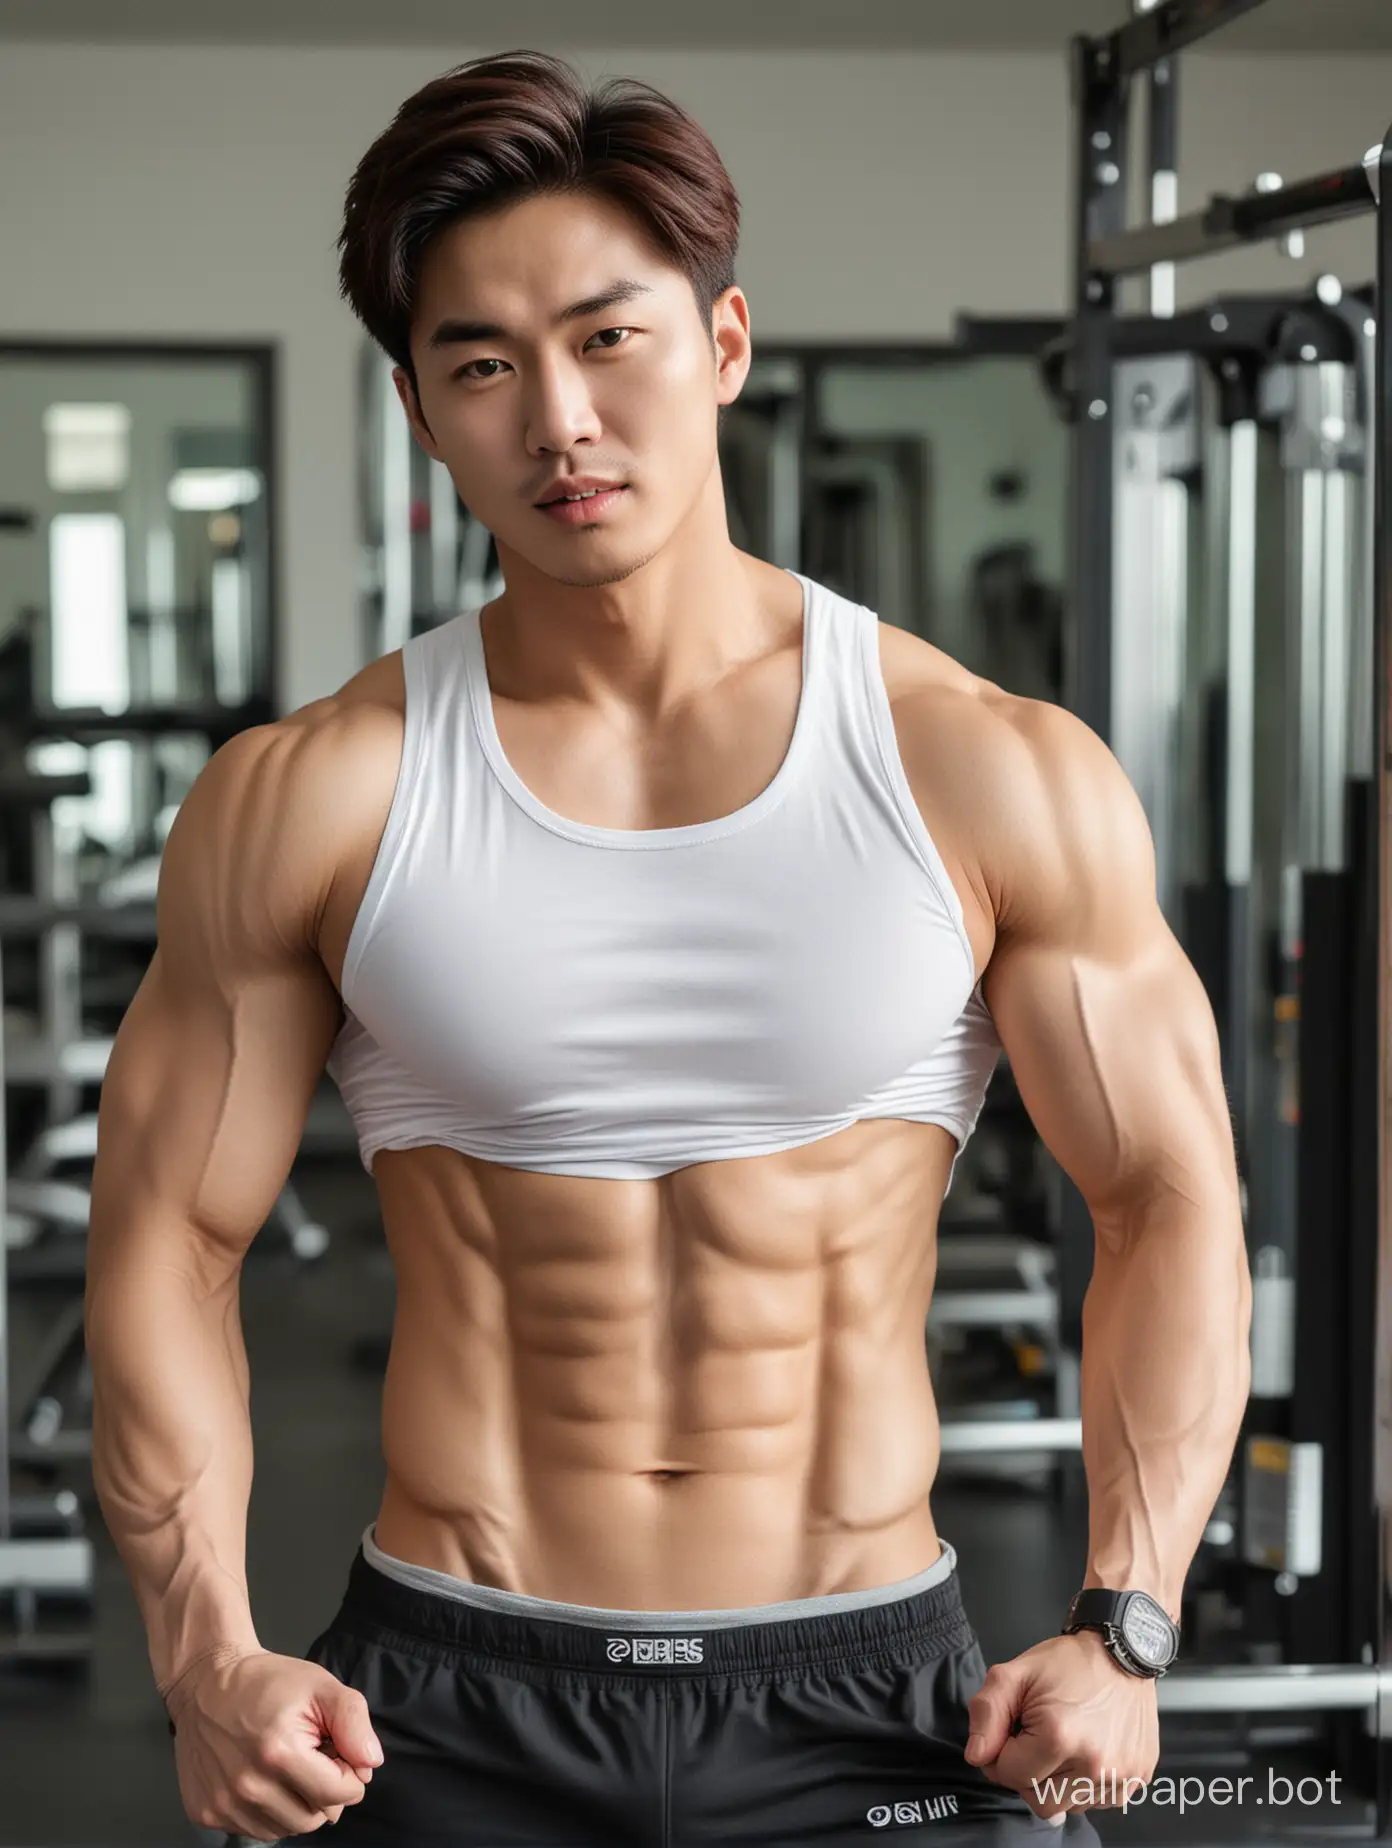 Korean handsome brother exercising in the gym, wearing a white shirt, with obvious six-pack abs,